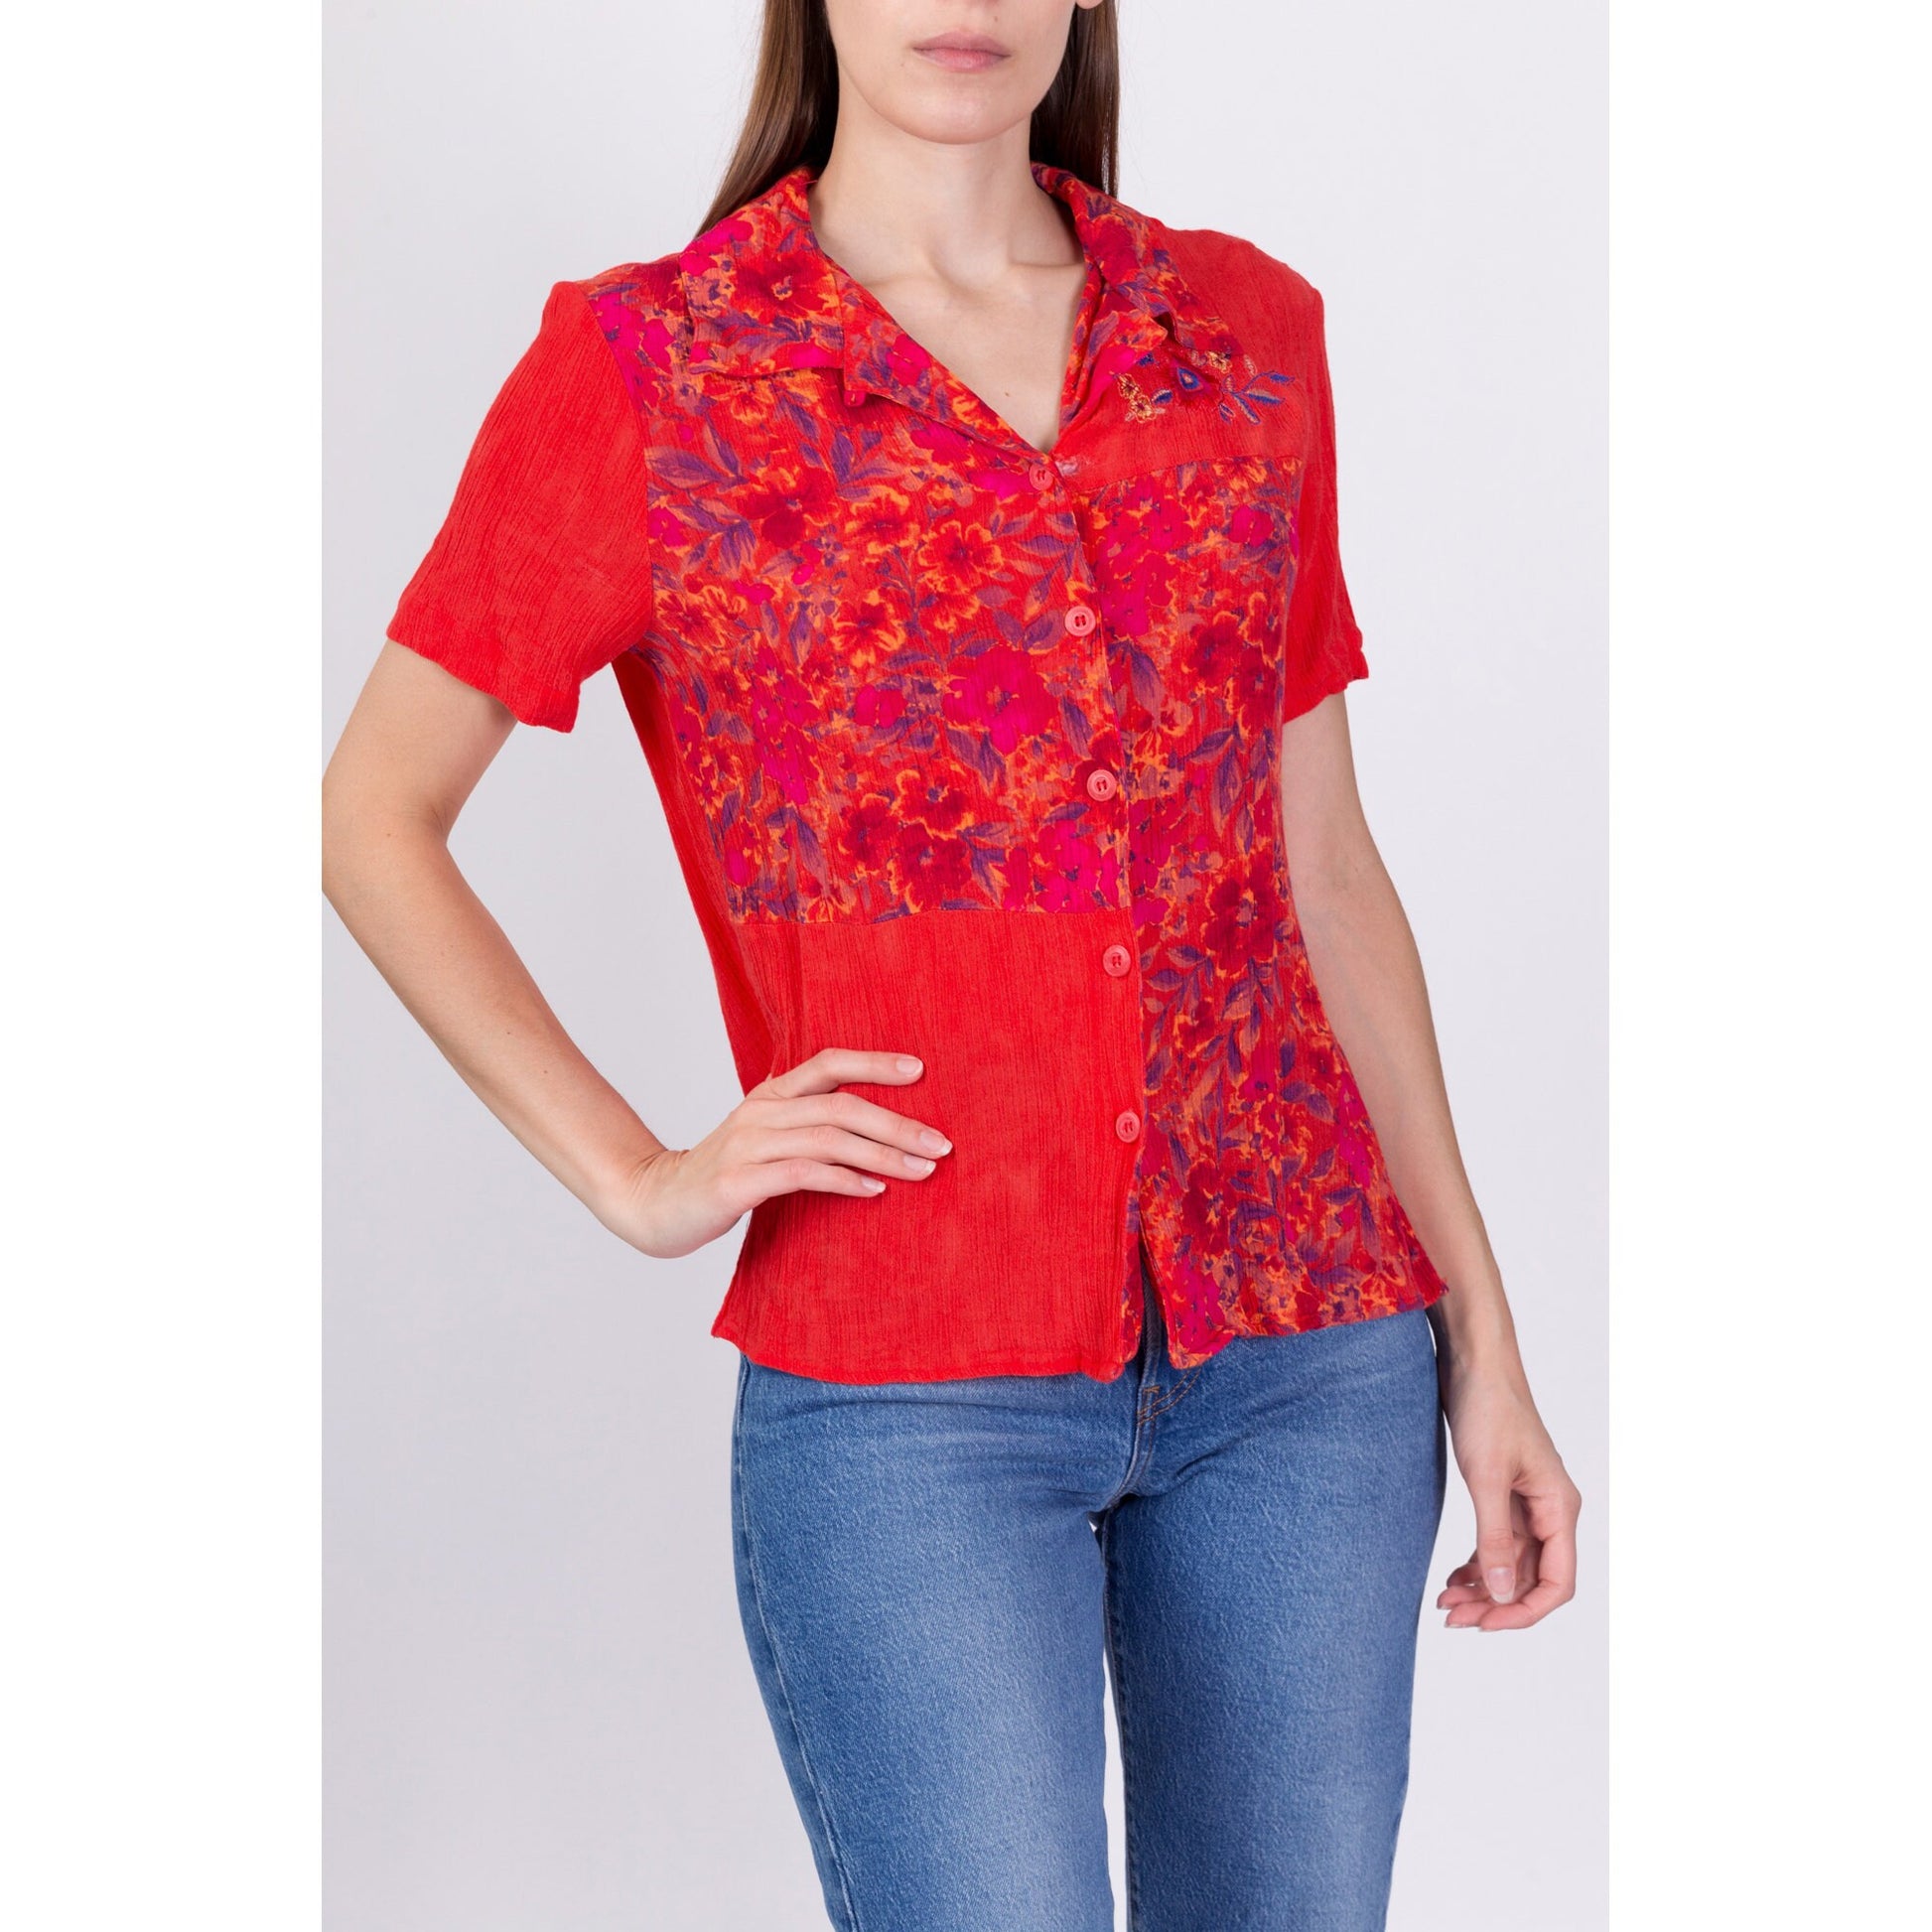 90s Red Floral Rayon Blouse - Medium 